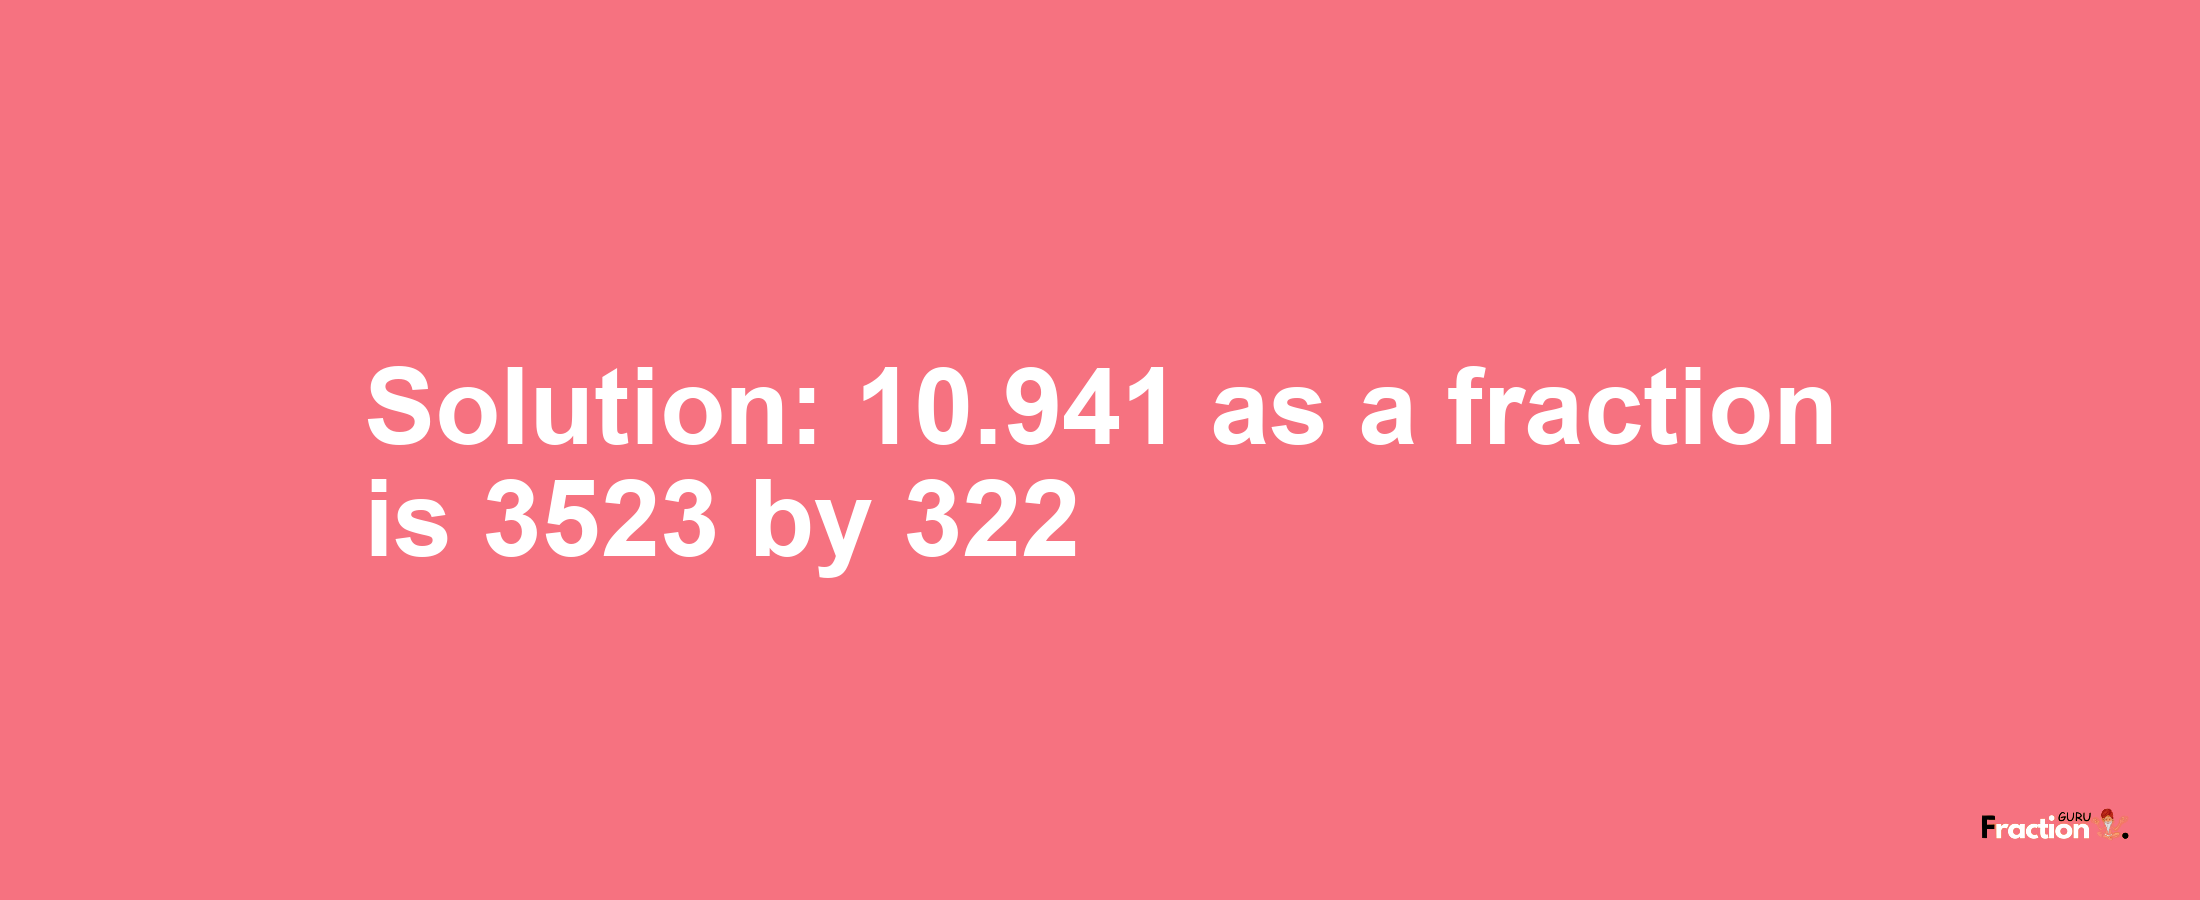 Solution:10.941 as a fraction is 3523/322